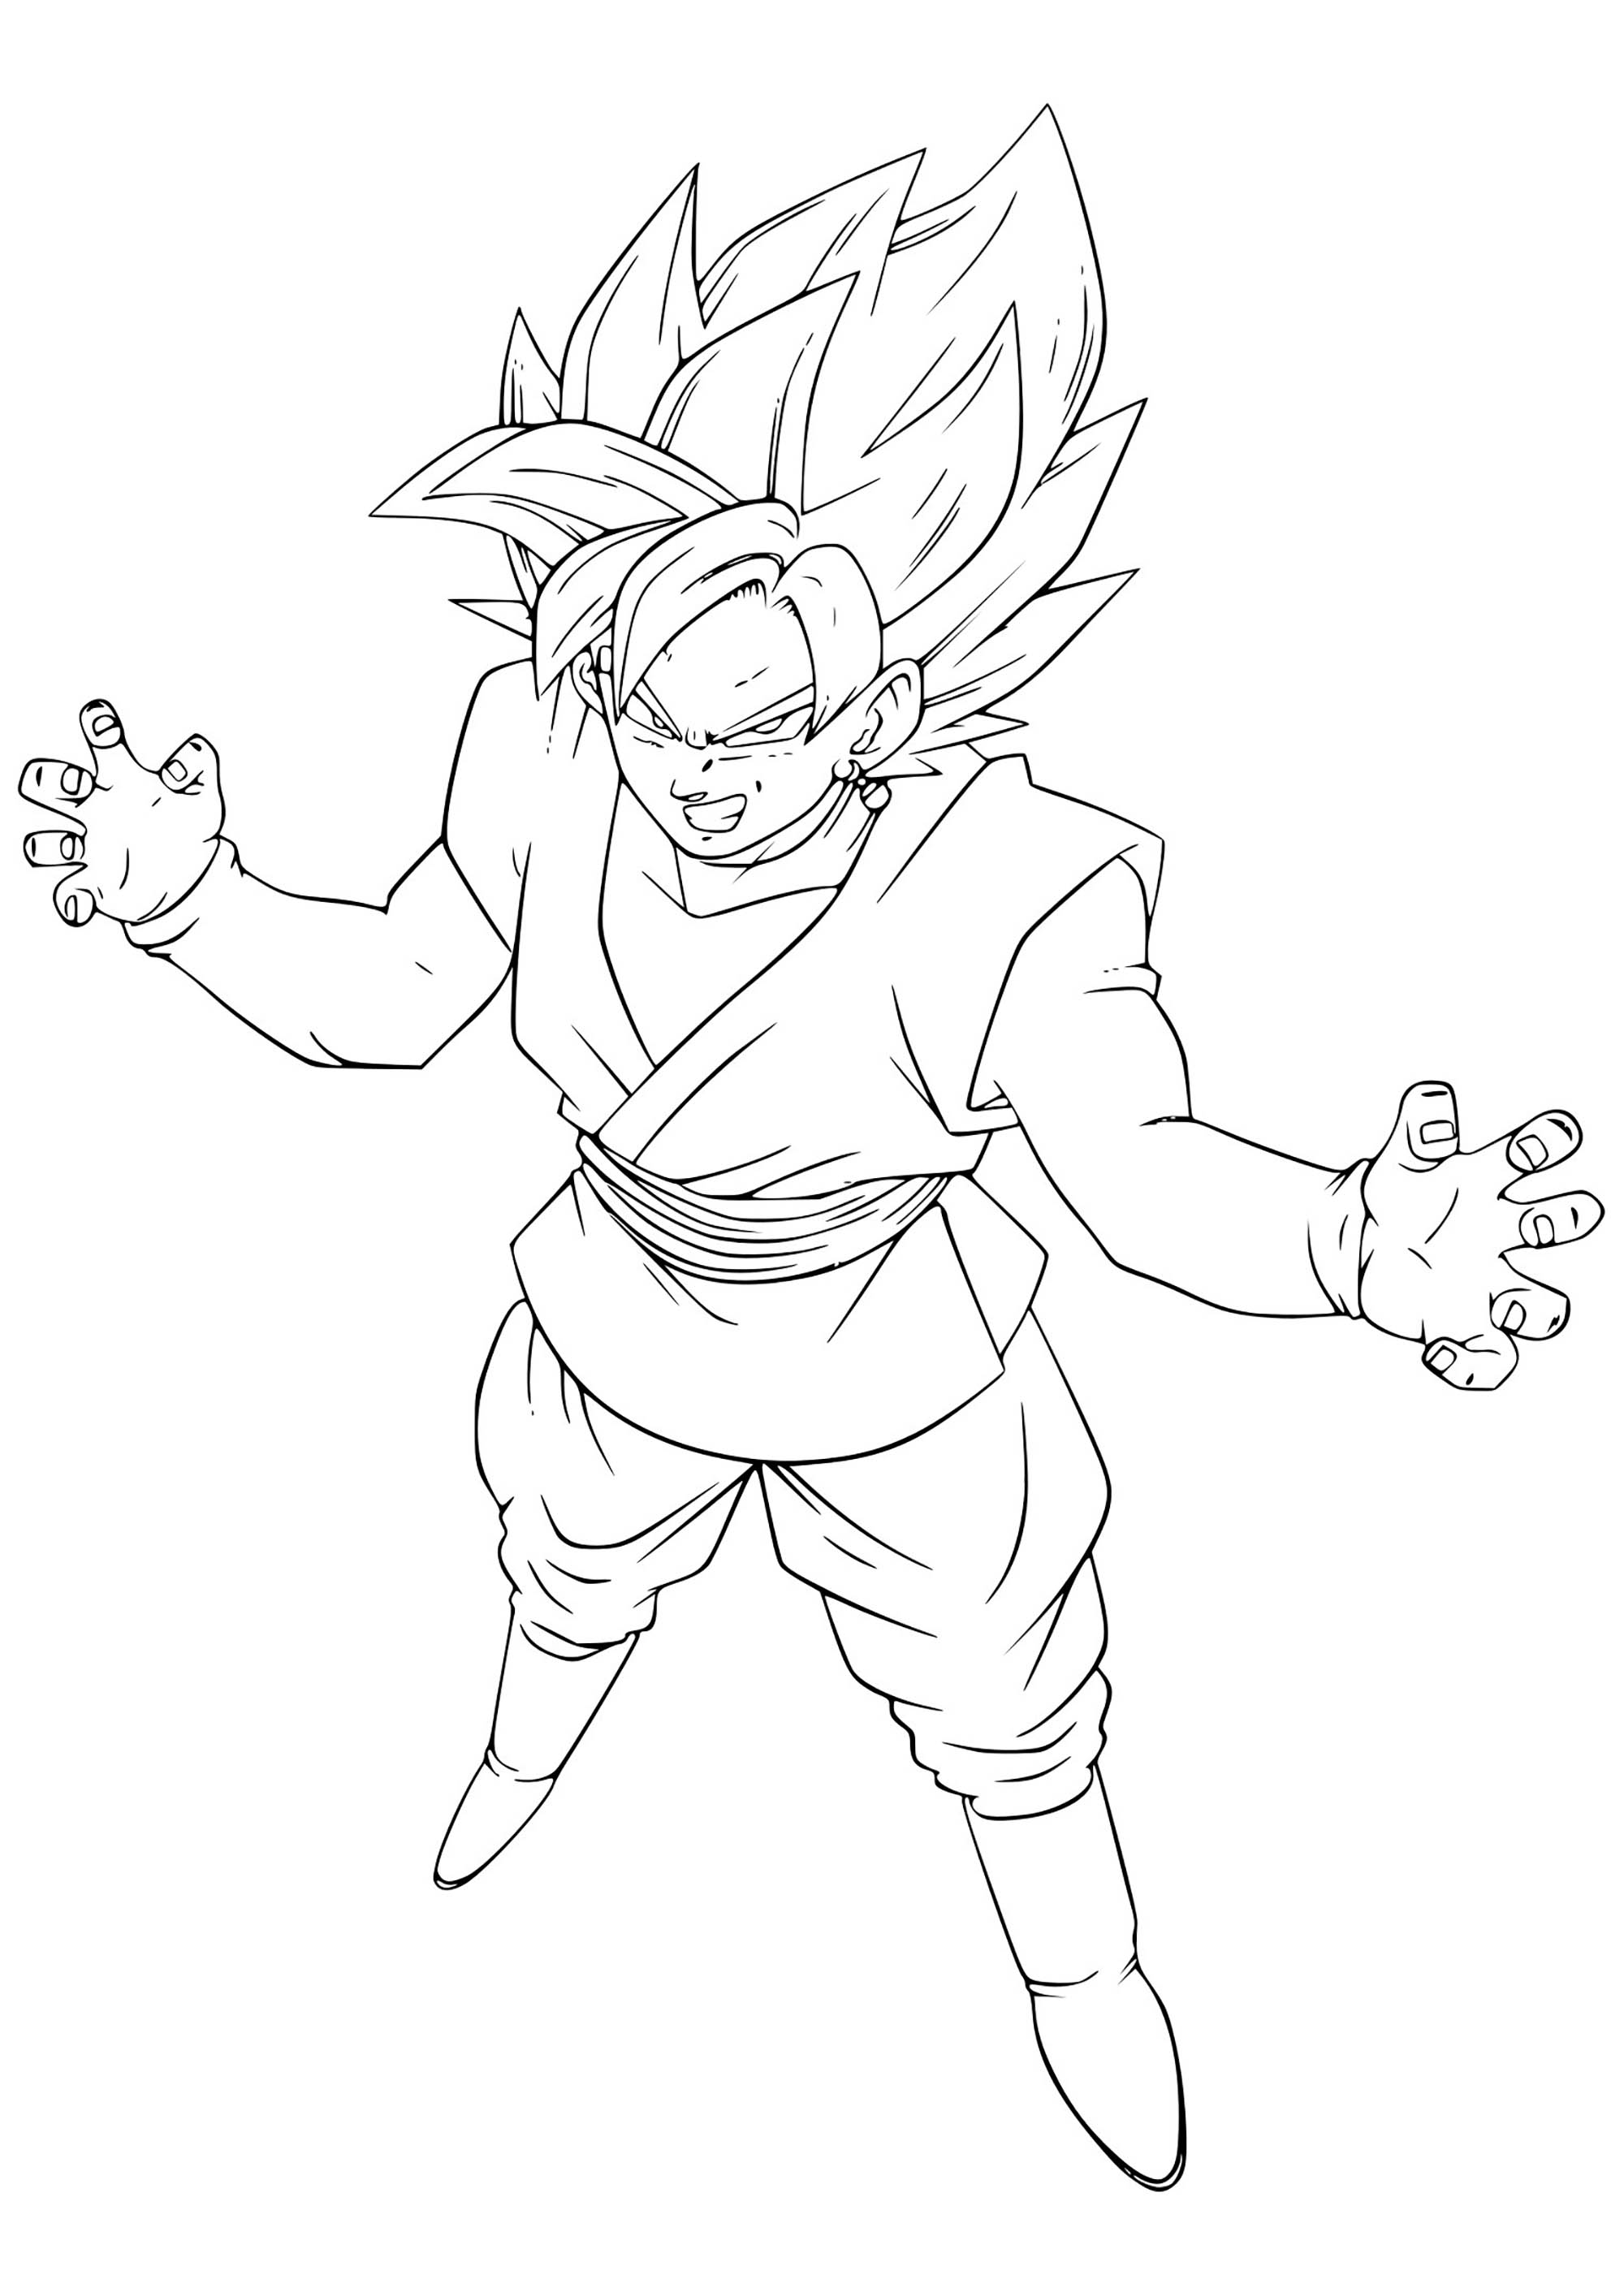 Dragon Ball Super coloring page with few details for kids : Black Pink Goku